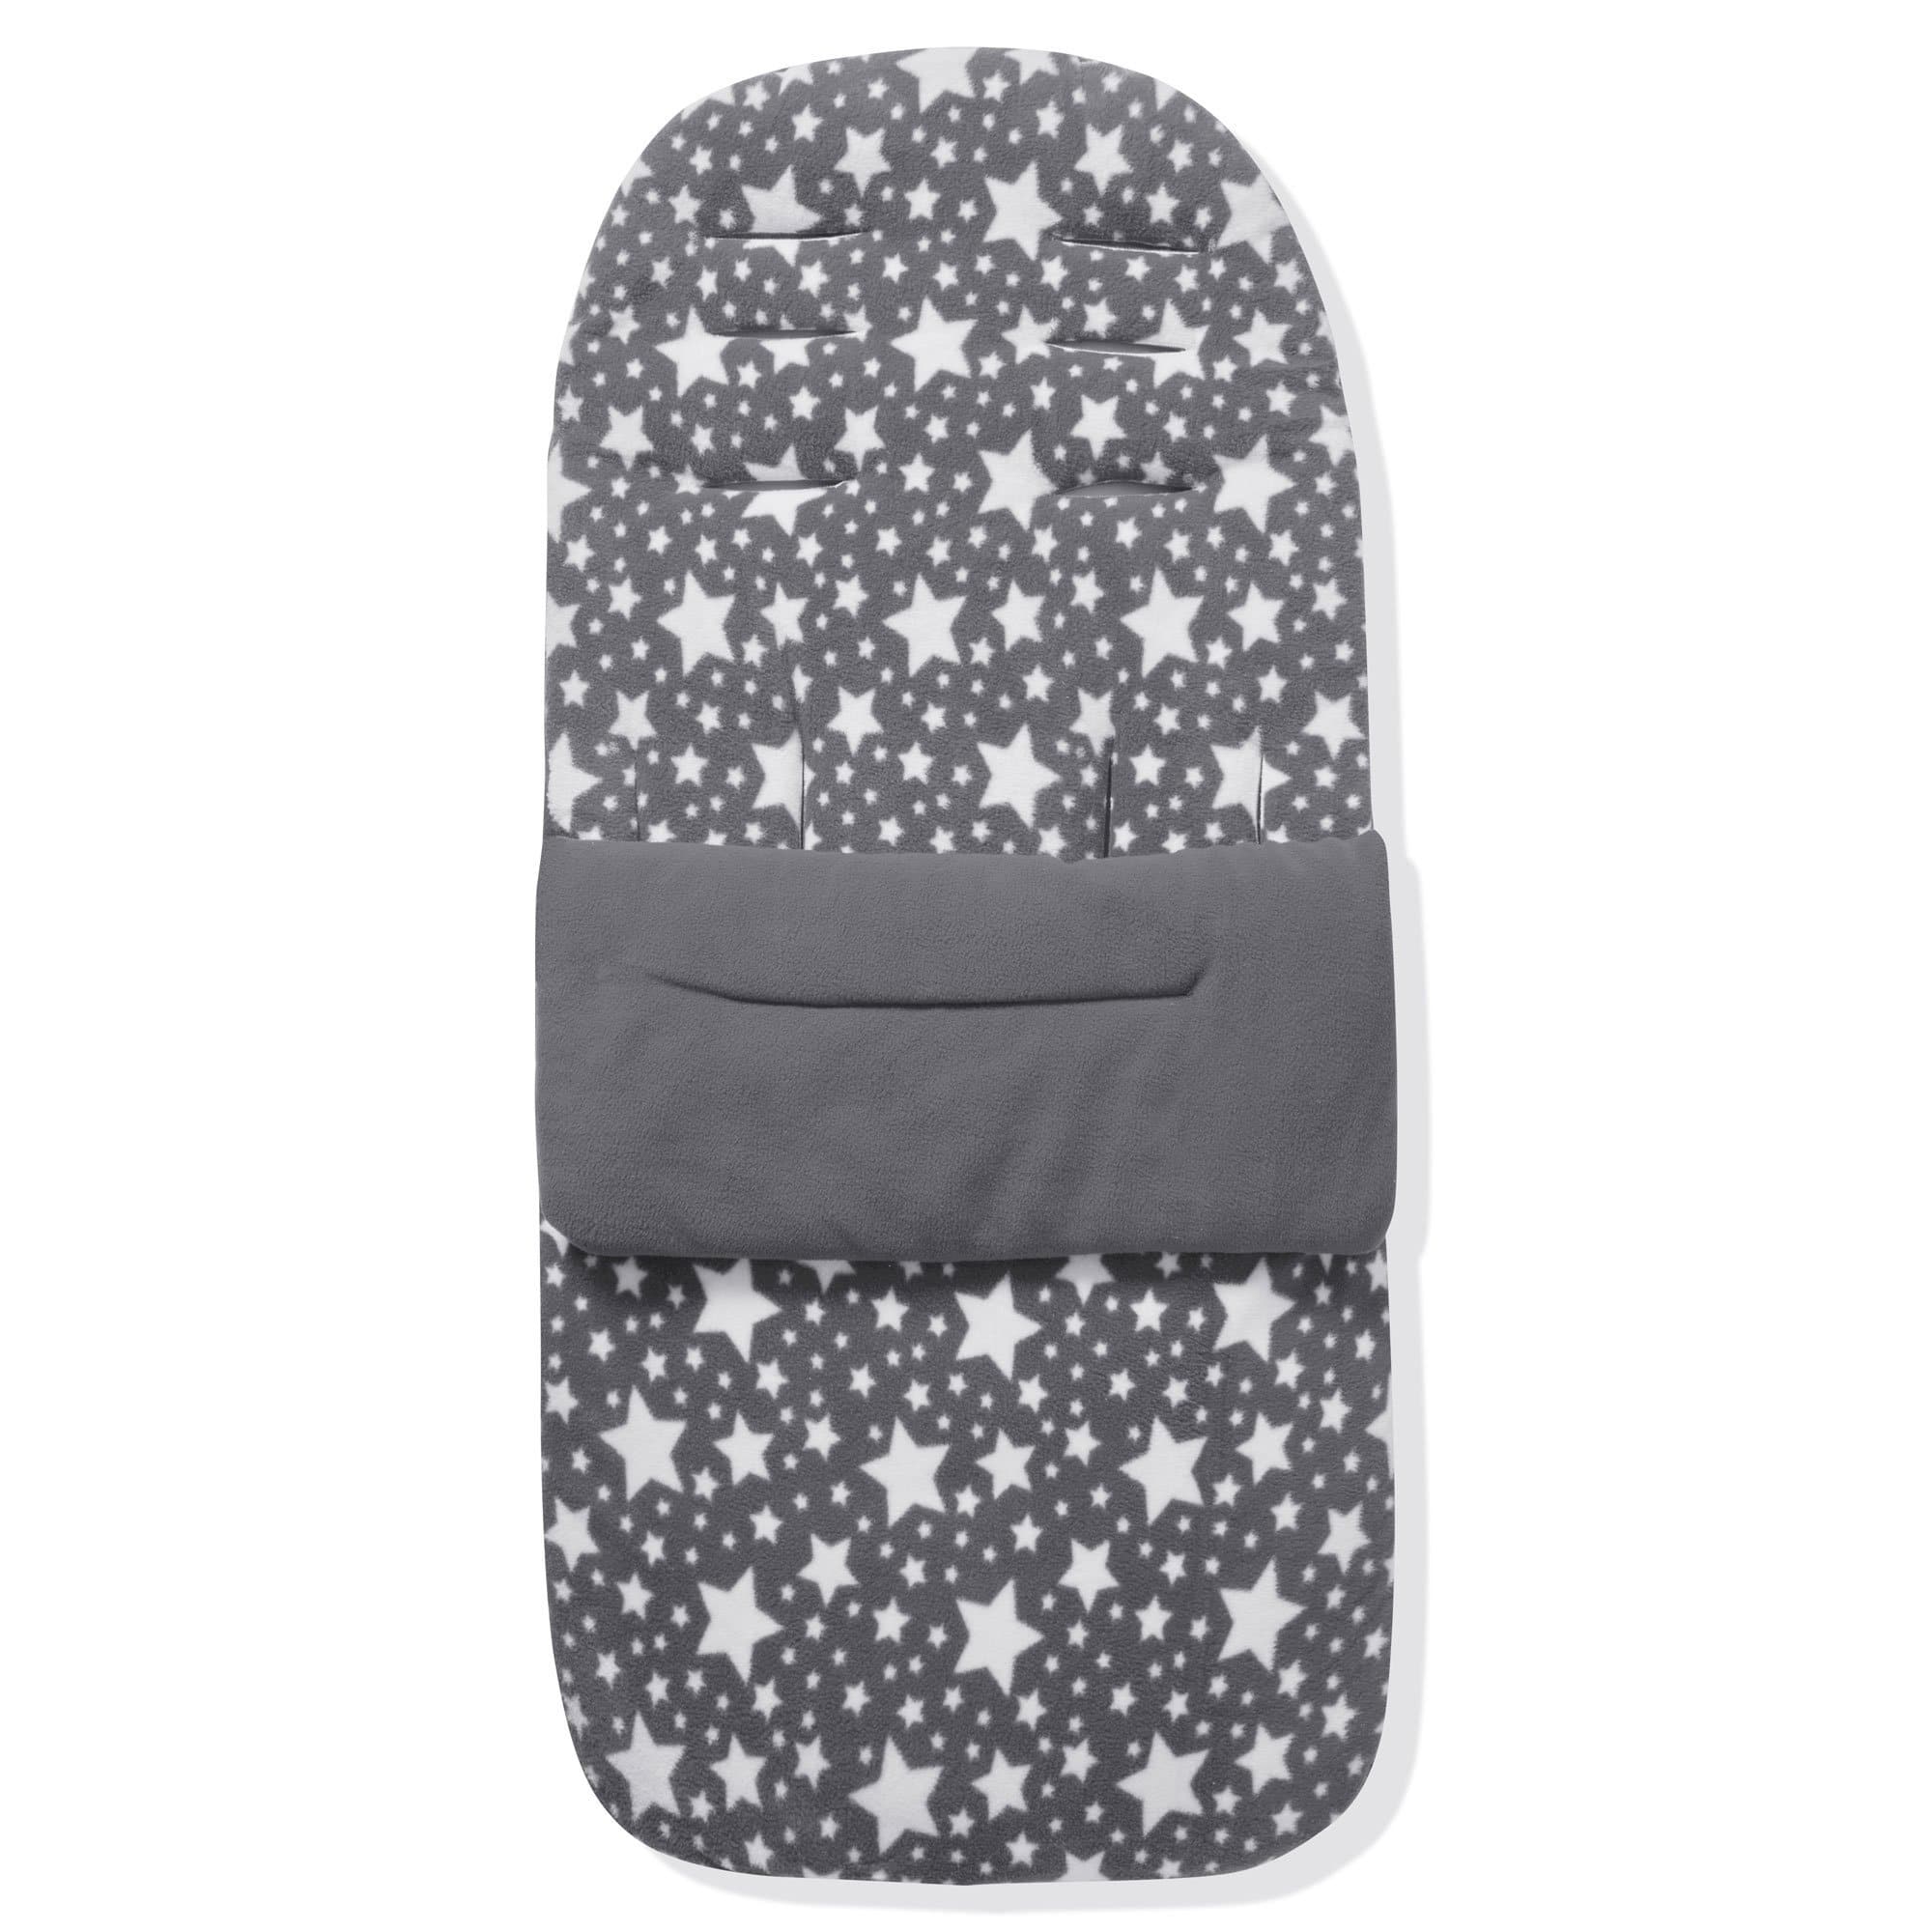 Fleece Footmuff / Cosy Toes Compatible with Graco - Grey Star / Fits All Models | For Your Little One